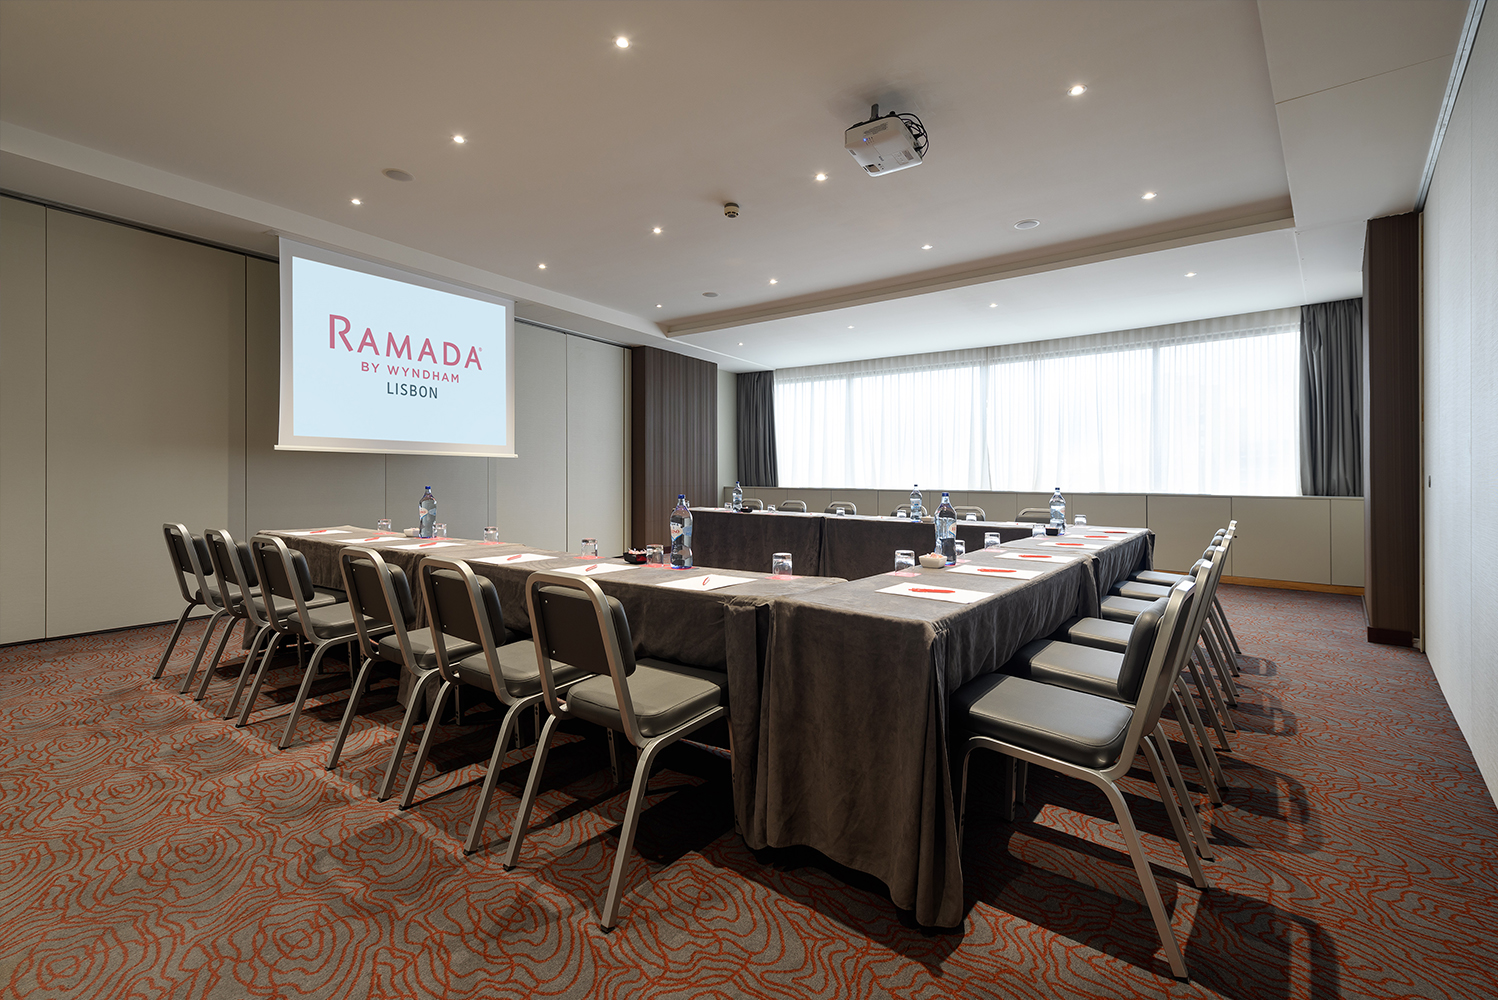 Ramada Lisbon former Olaias Park Hotel refurbished its meeting and event rooms following an investment by DHM - Discovery H